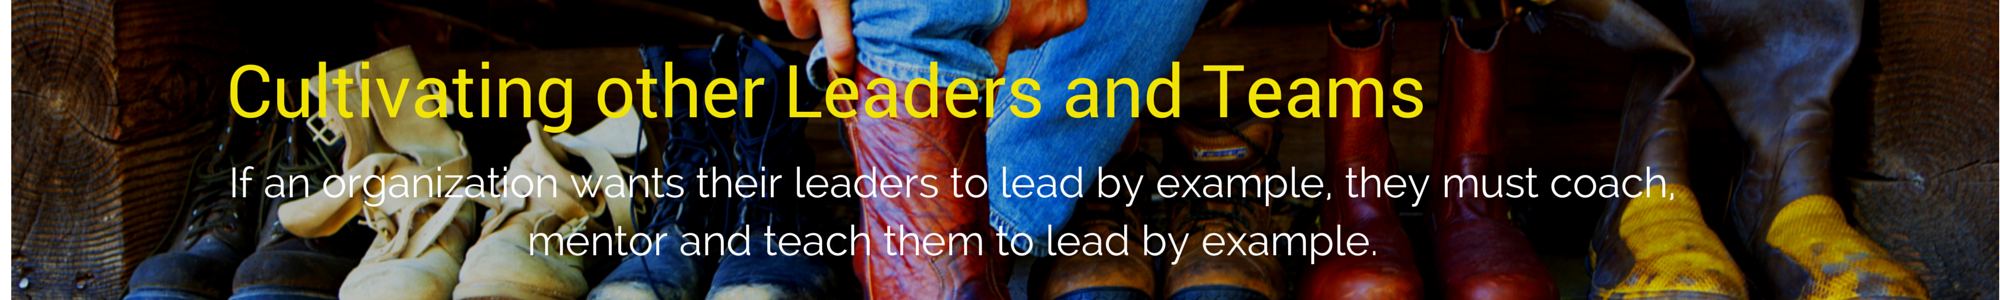 5.Cultivating Leaders - Boots